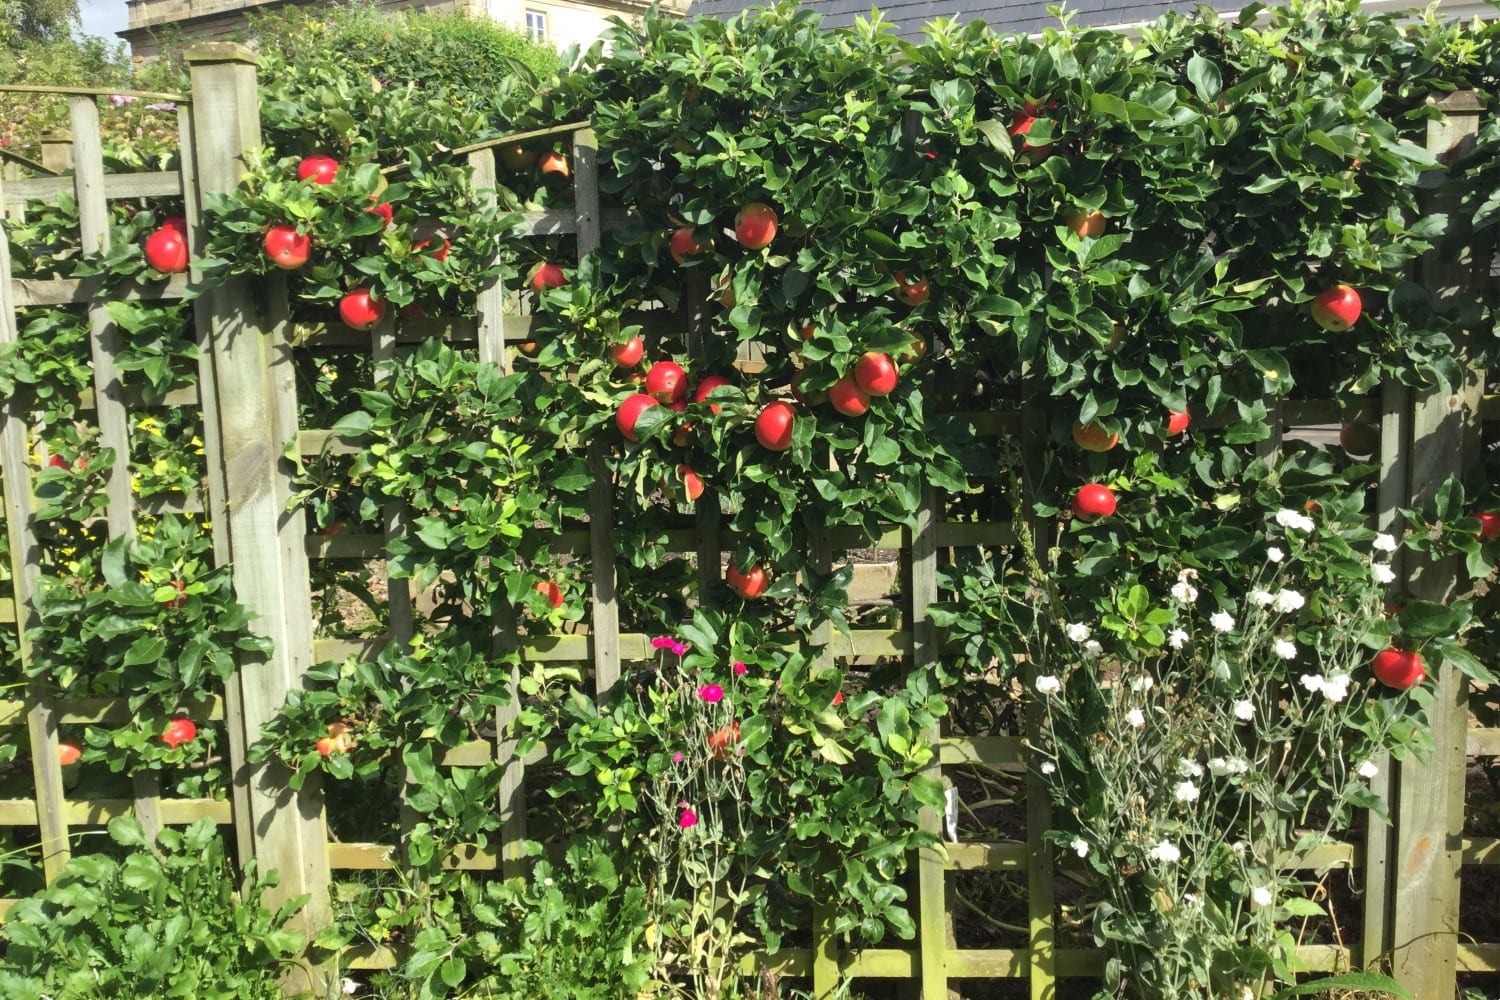 Red apples growing against a trellis fence